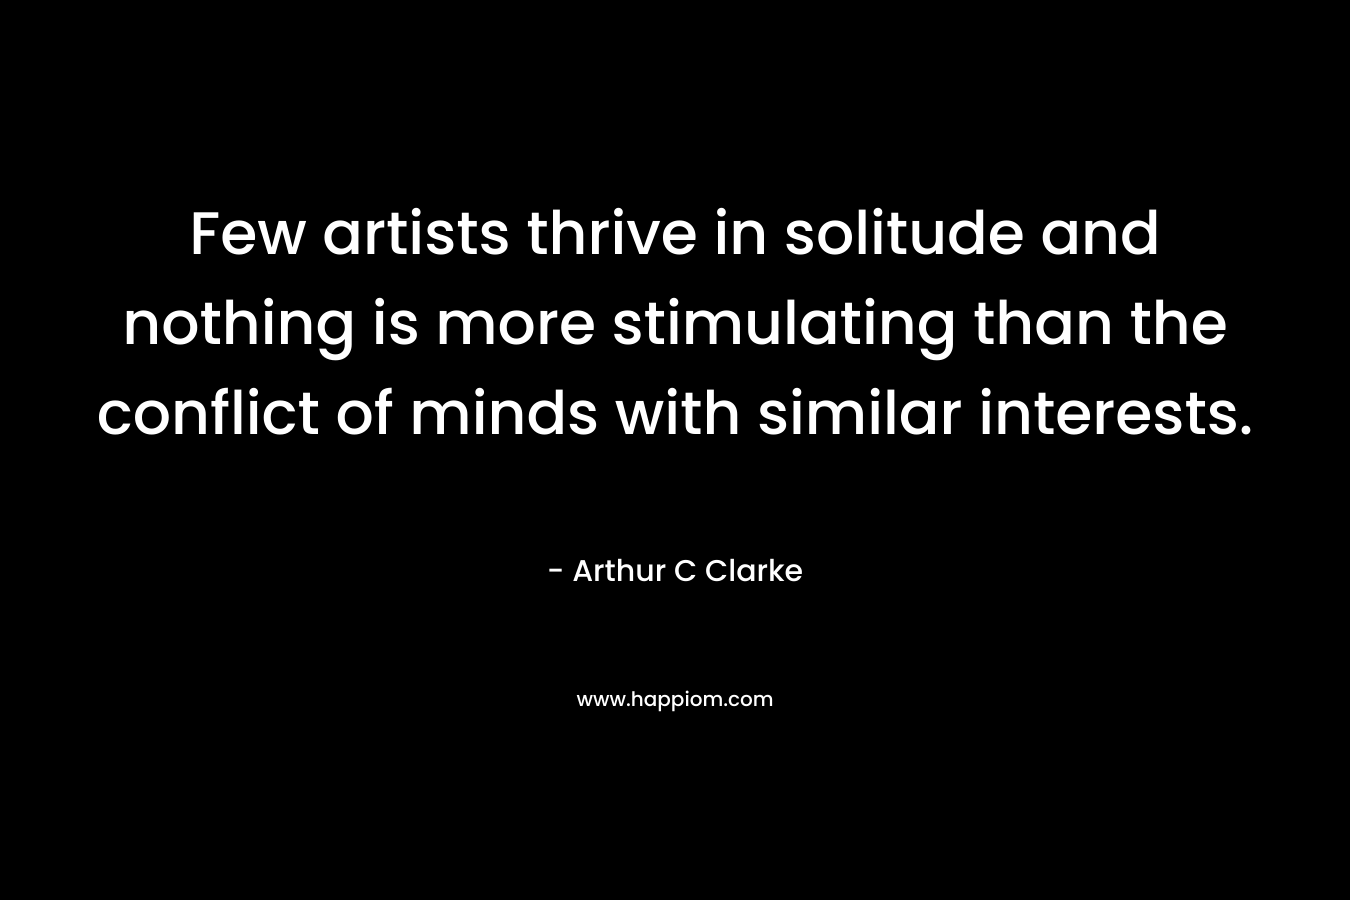 Few artists thrive in solitude and nothing is more stimulating than the conflict of minds with similar interests. – Arthur C Clarke